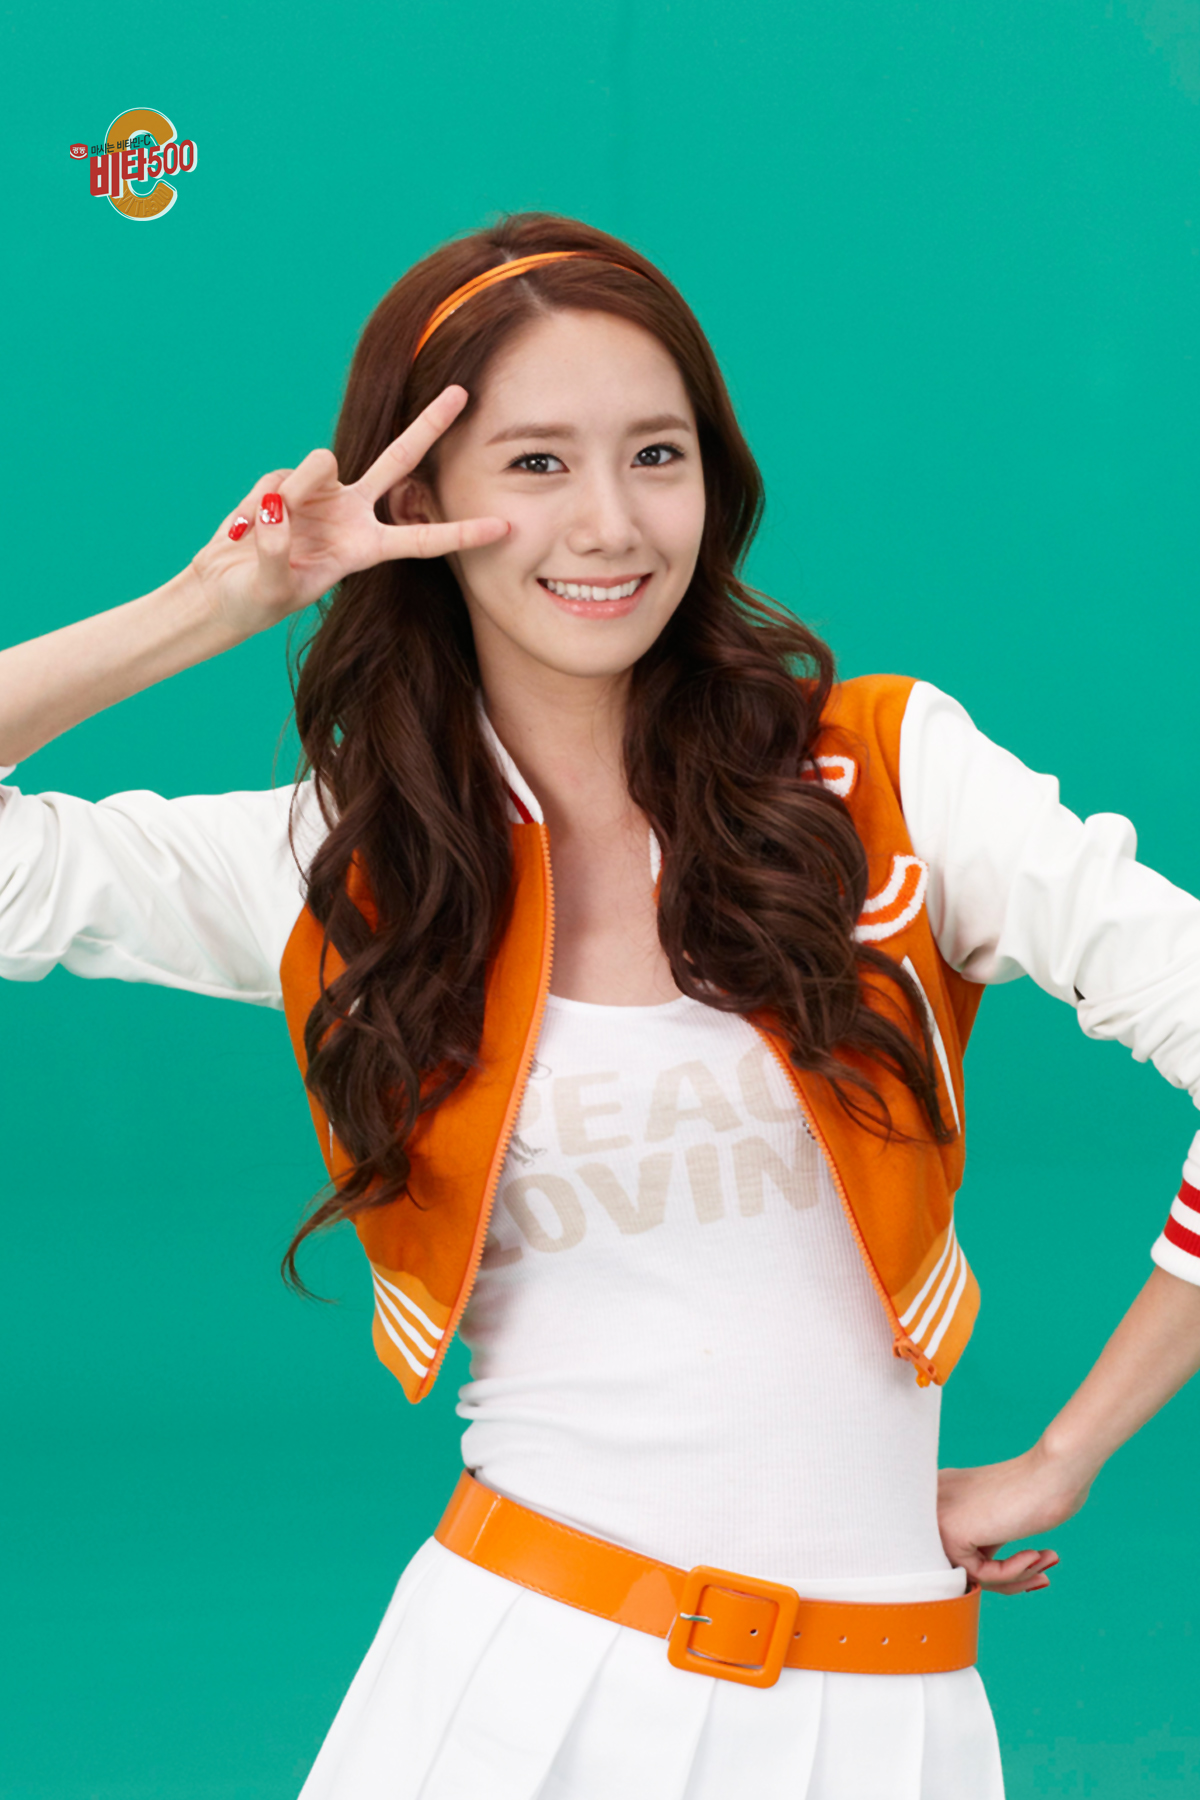 yoona SNSD @ Vita500 Promotion Pictures - S♥NEISM Photo (28305626) - Fanpop